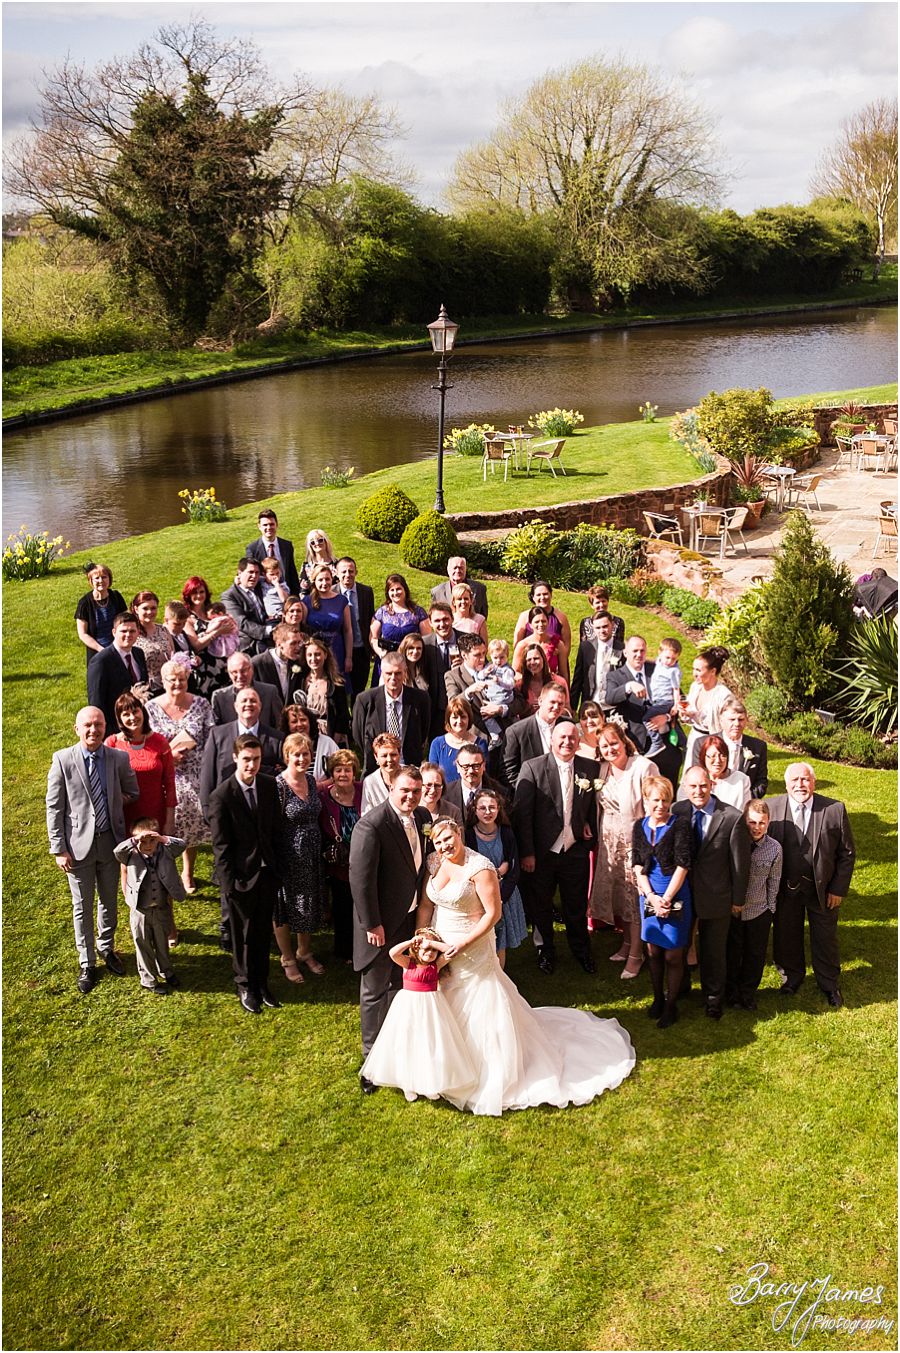 Beautiful relaxed spring wedding photography at The Moat House in Acton Trussell by Award Winning Wedding Photographer Barry James